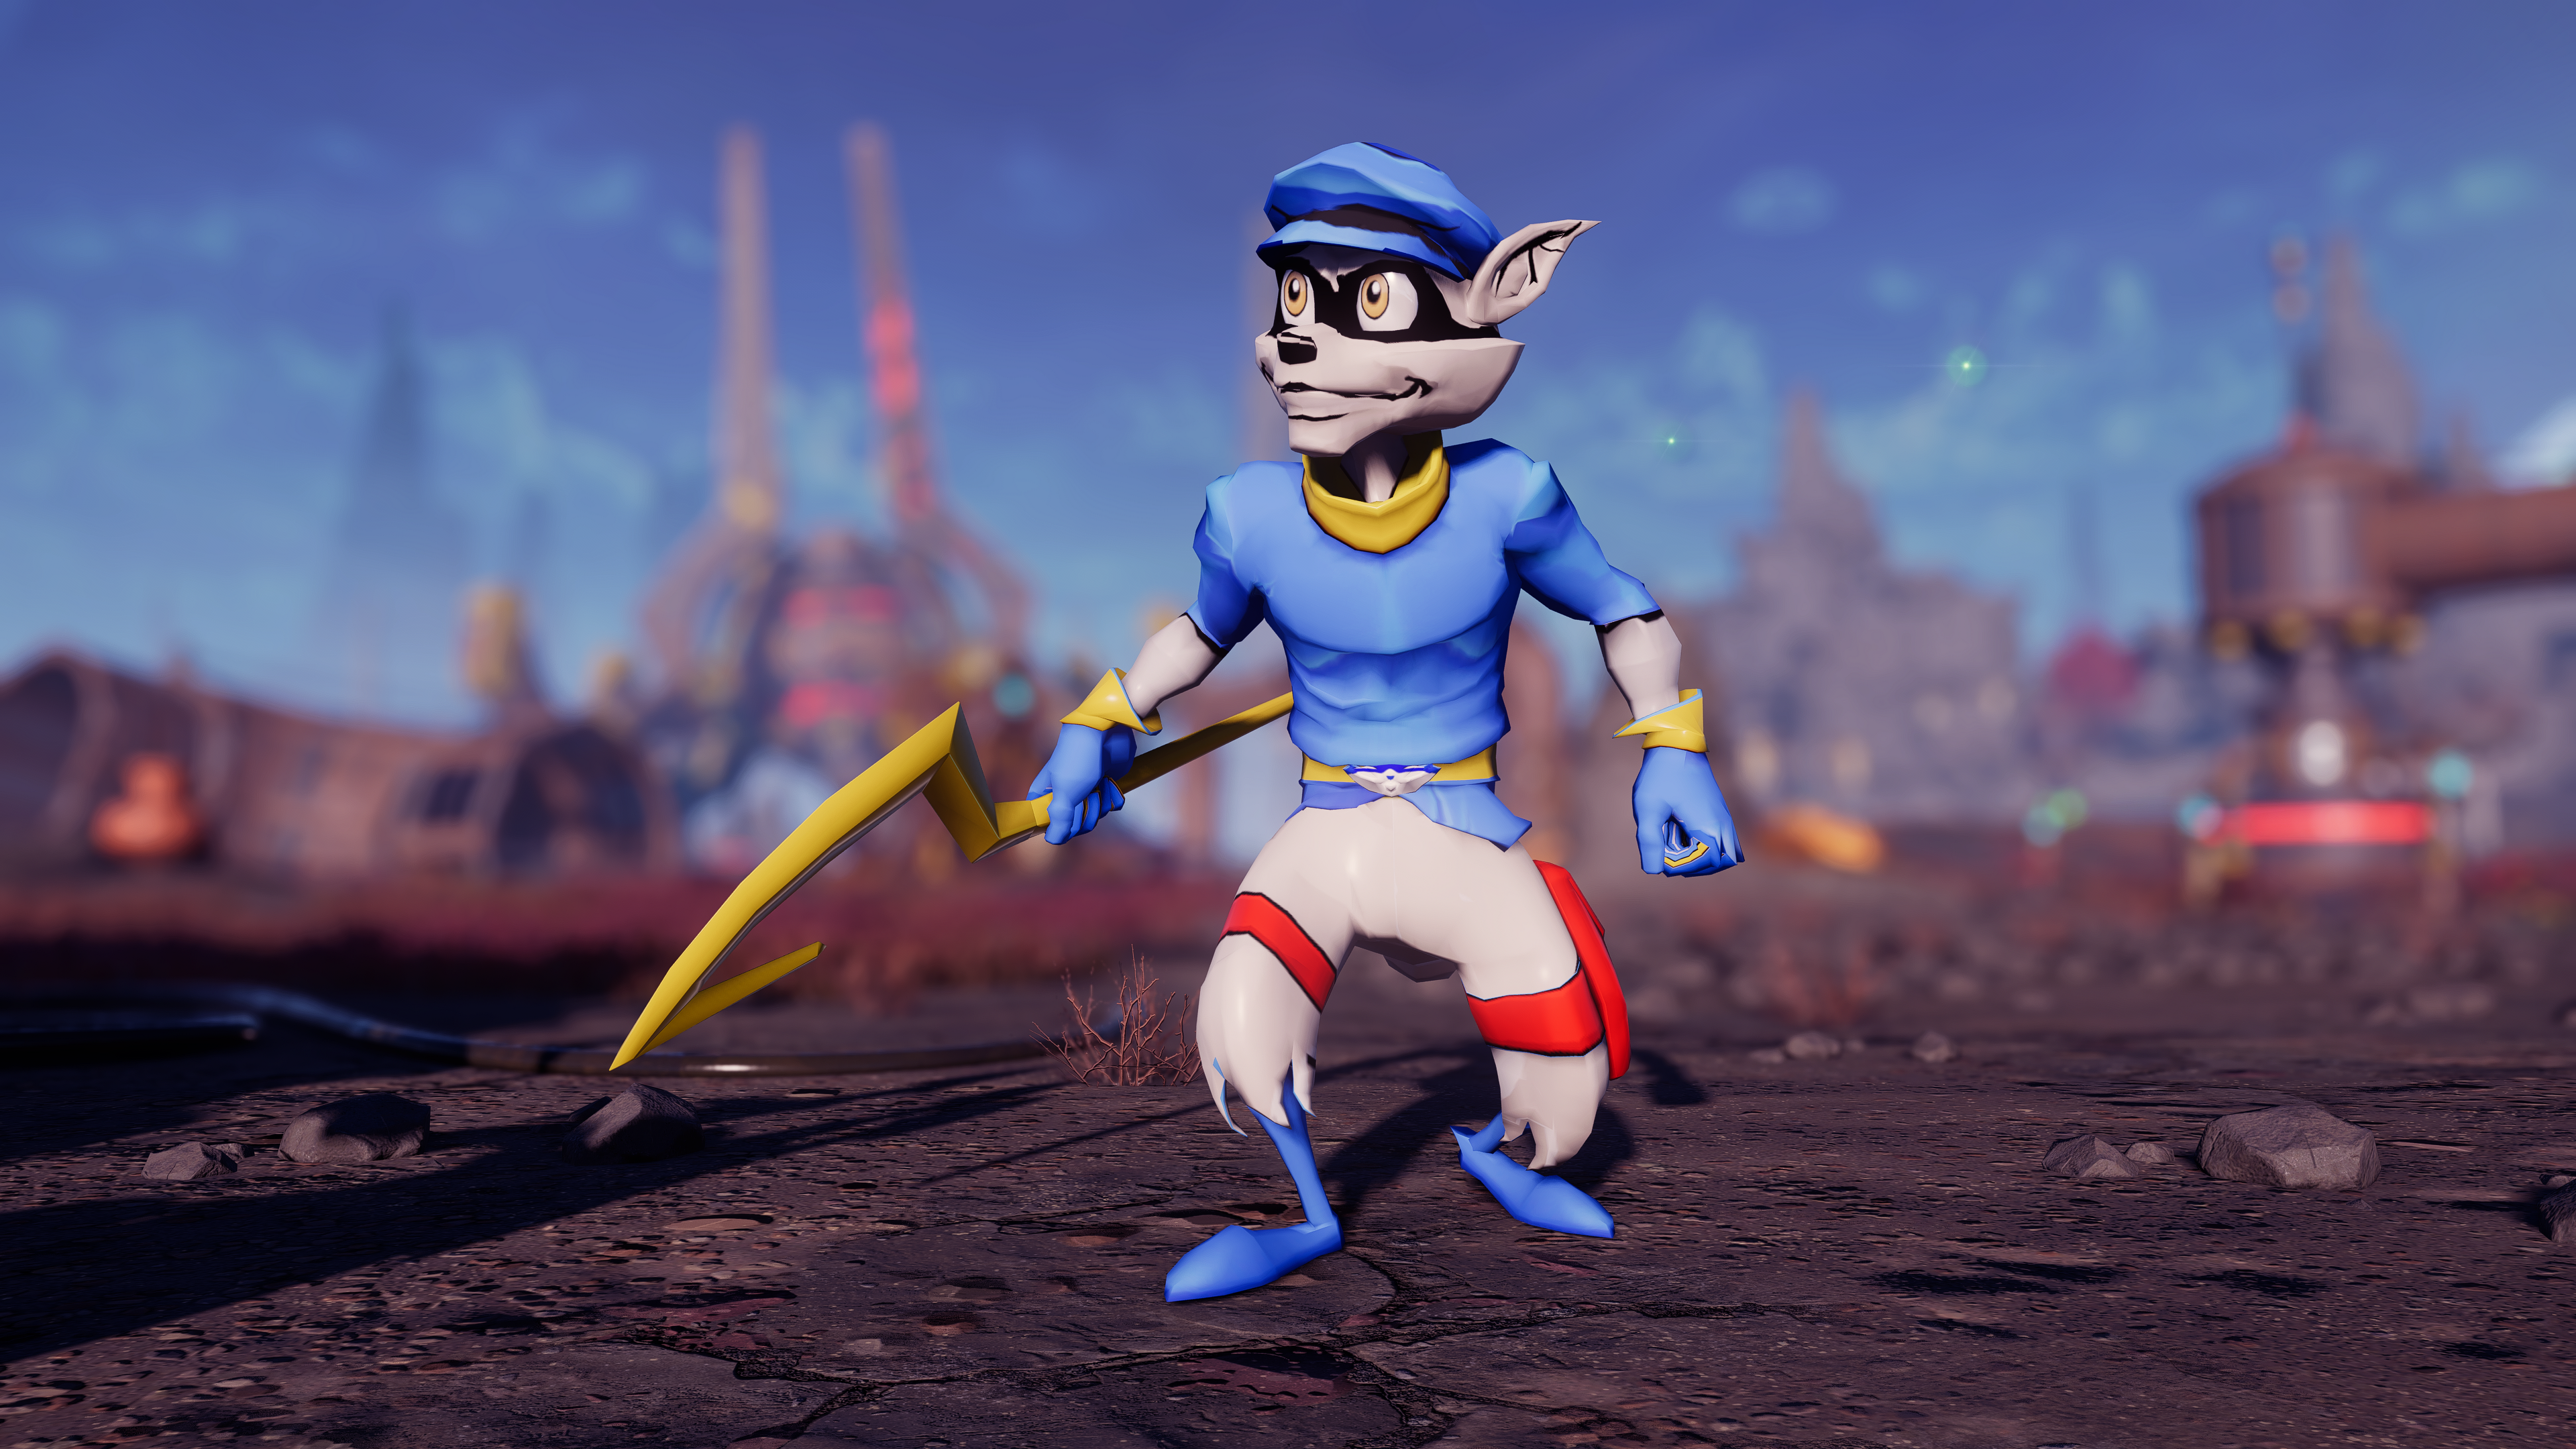 Sly Cooper 5 Imagined Part 1 - STORY 